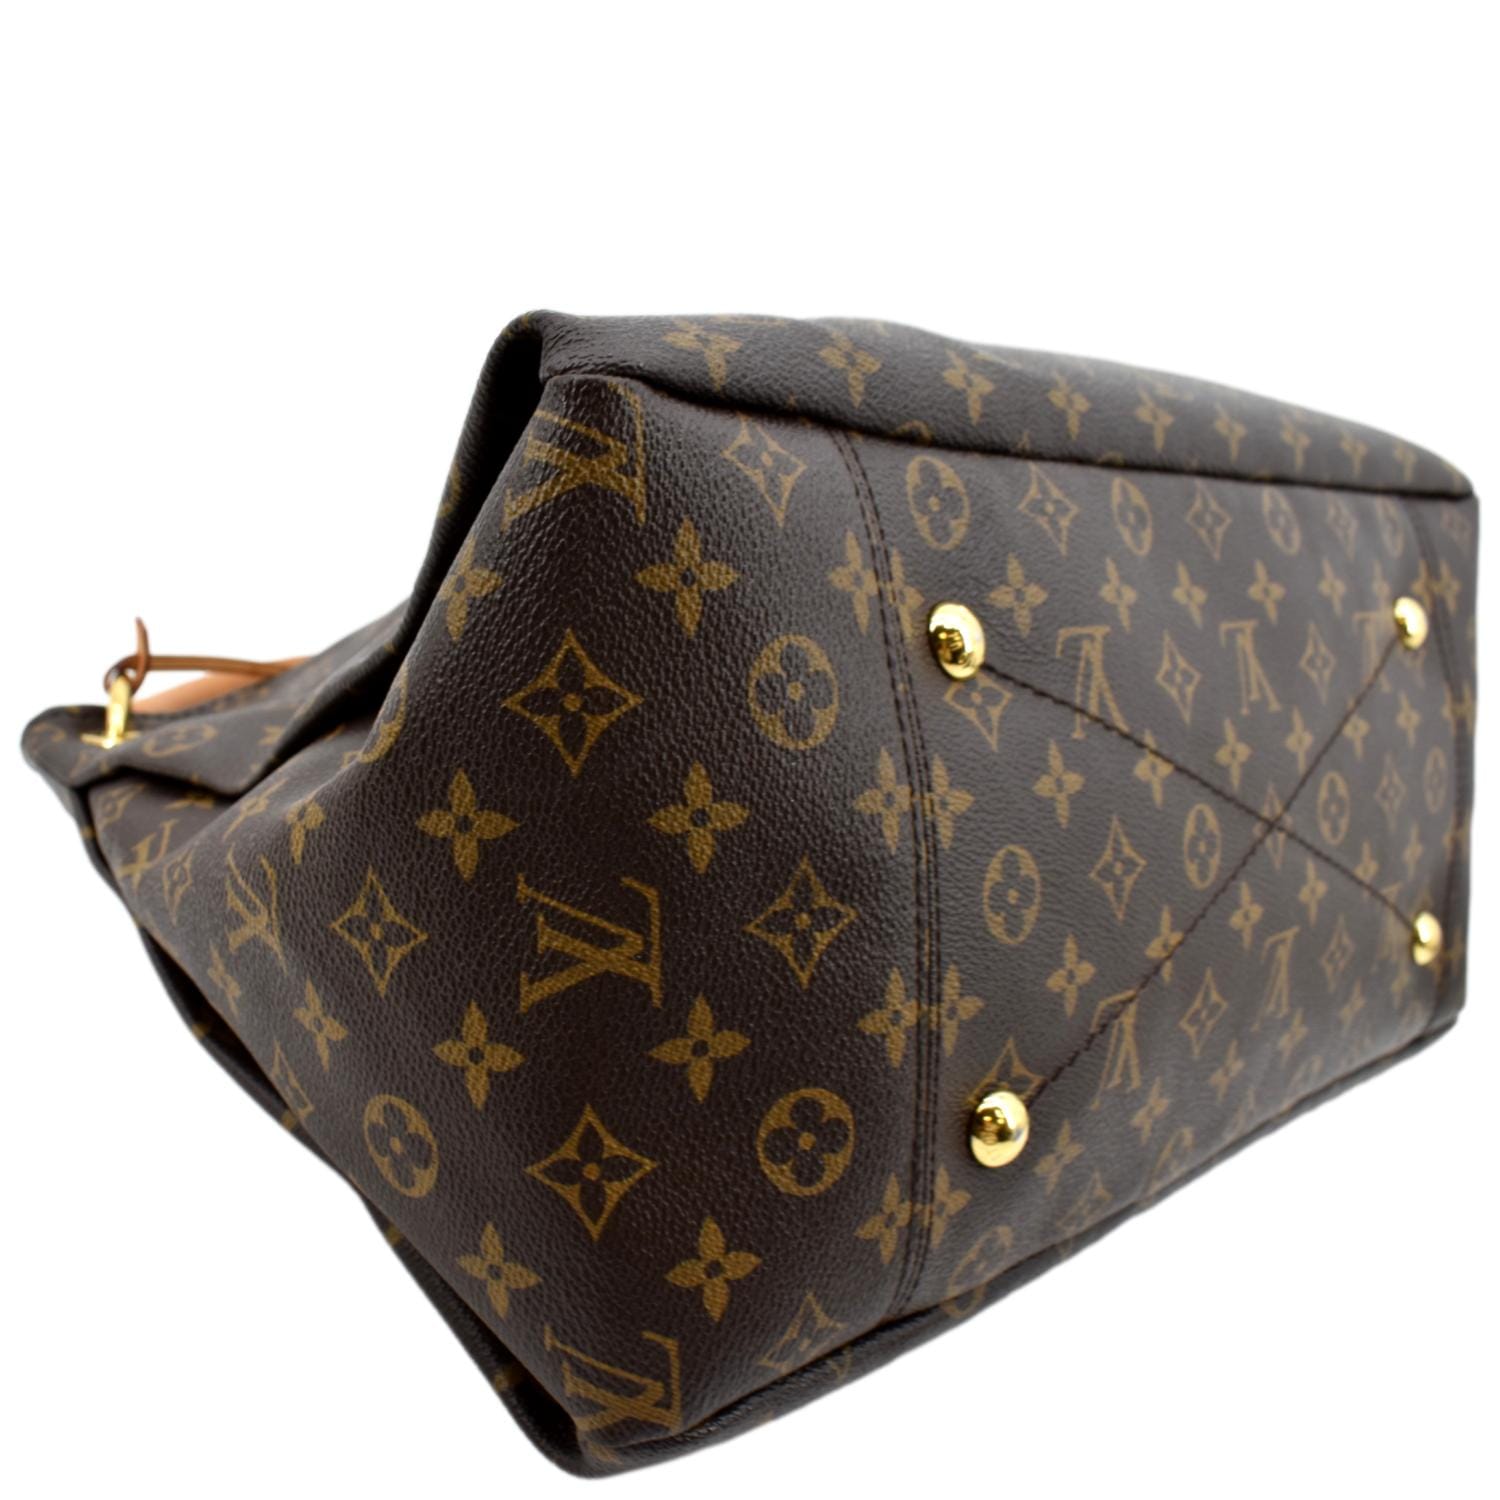 Louis Vuitton Artsy Hobo Mm 871221 Brown Monogram Canvas and